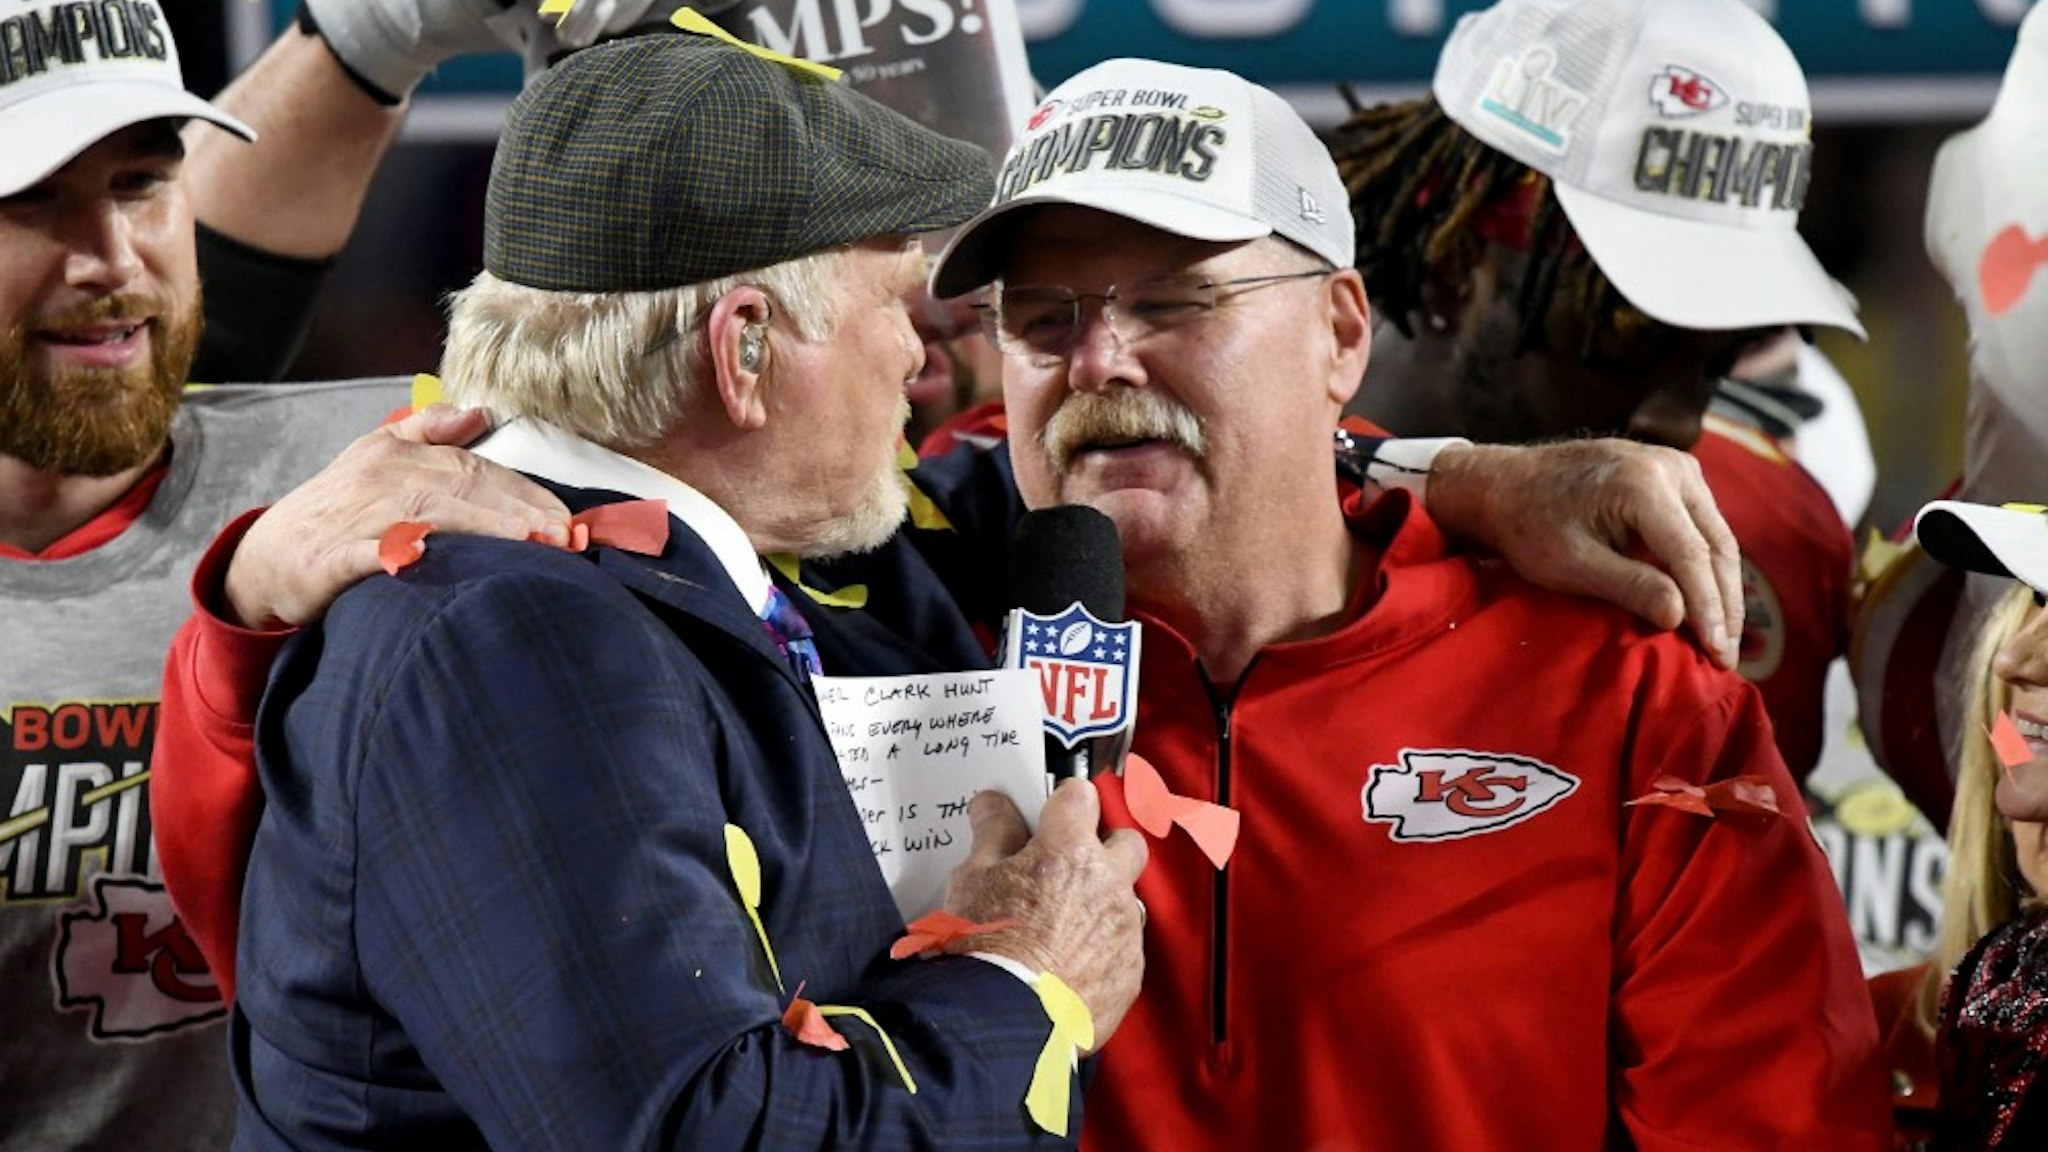 Head Coach Andy Reid of the Kansas City Chiefs celebrates with Terry Bradshaw after the Chiefs defeated the San Francisco 49ers in Super Bowl LIV at Hard Rock Stadium on February 02, 2020 in Miami, Florida.